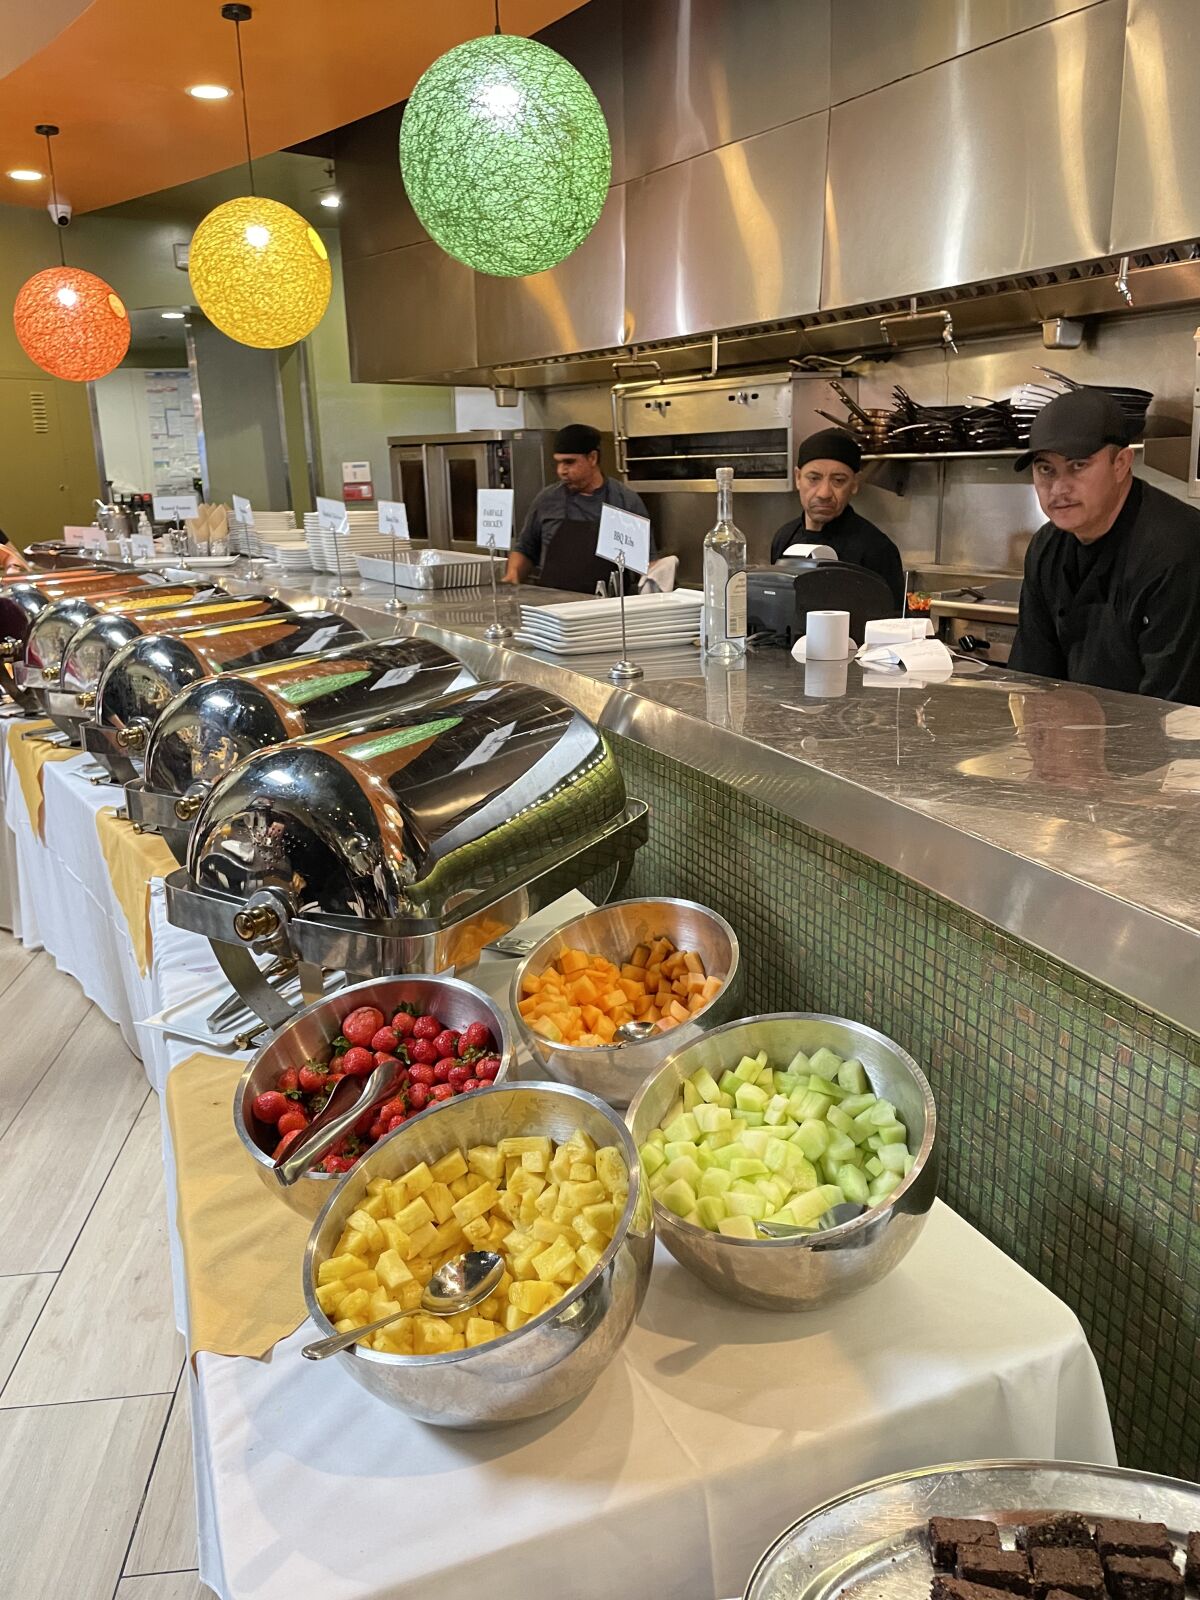 The Sunday brunch buffet line at Citrus City Grille in Orange.